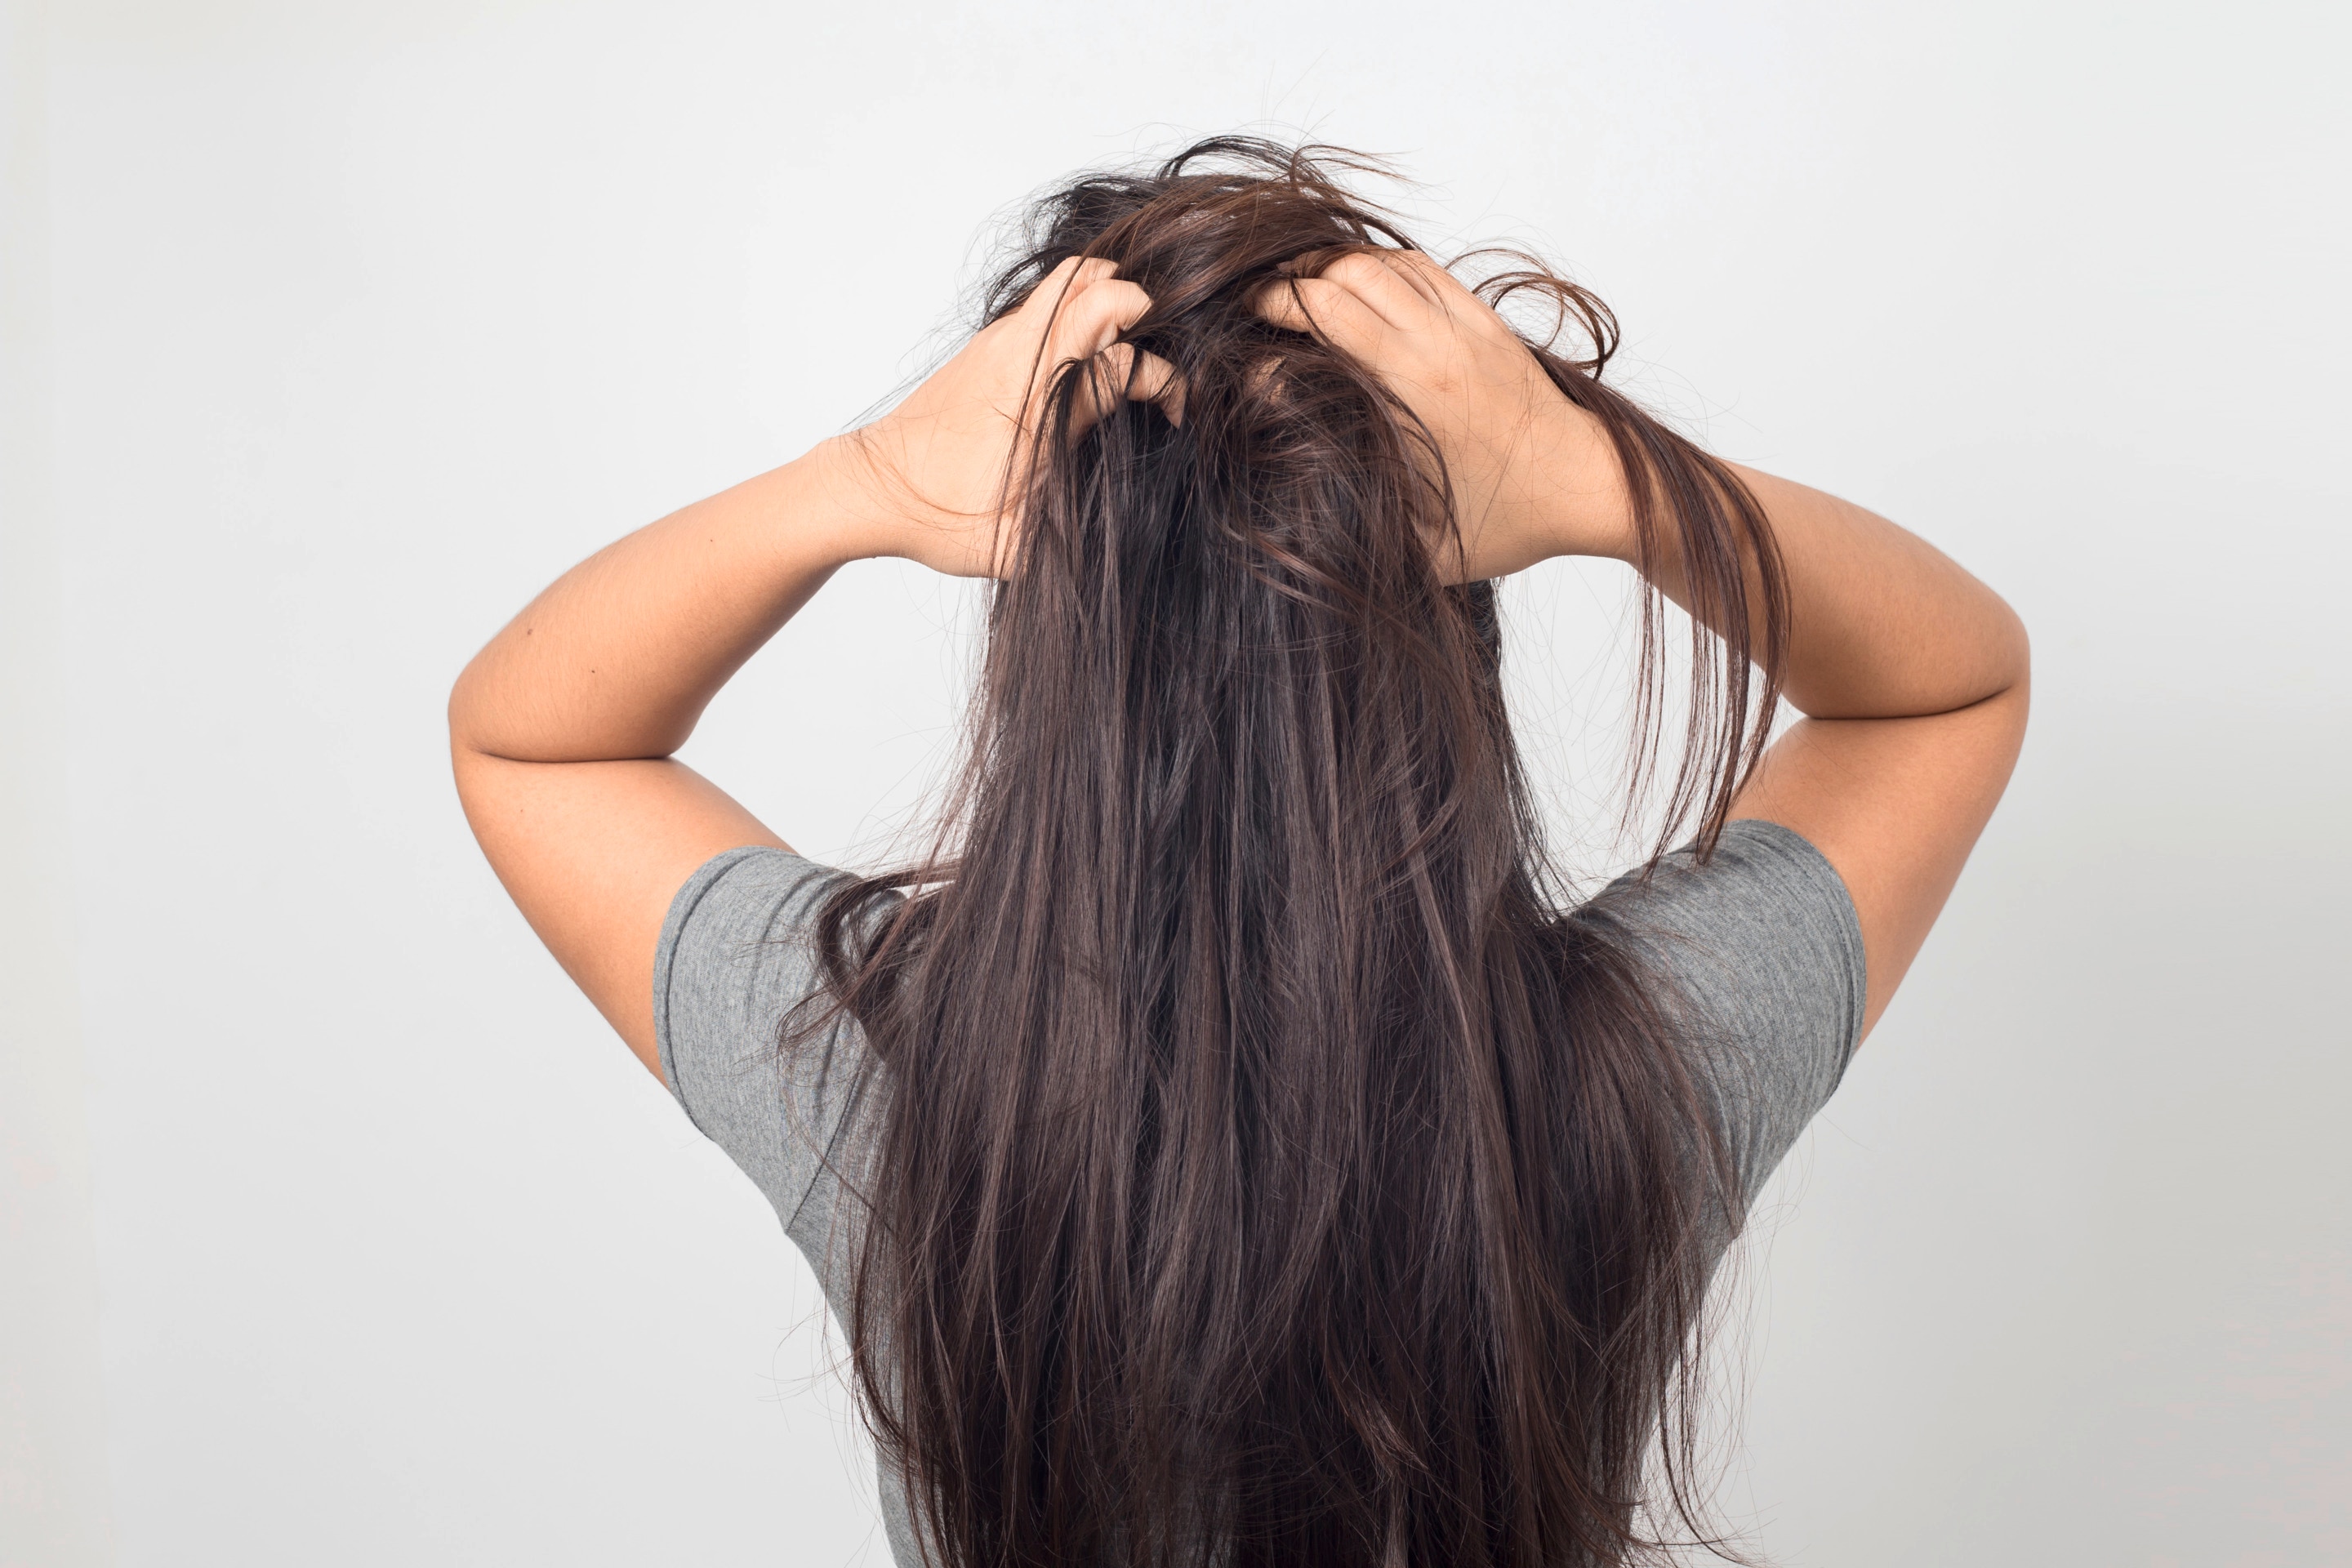 Women with itchy scalp scratching hair